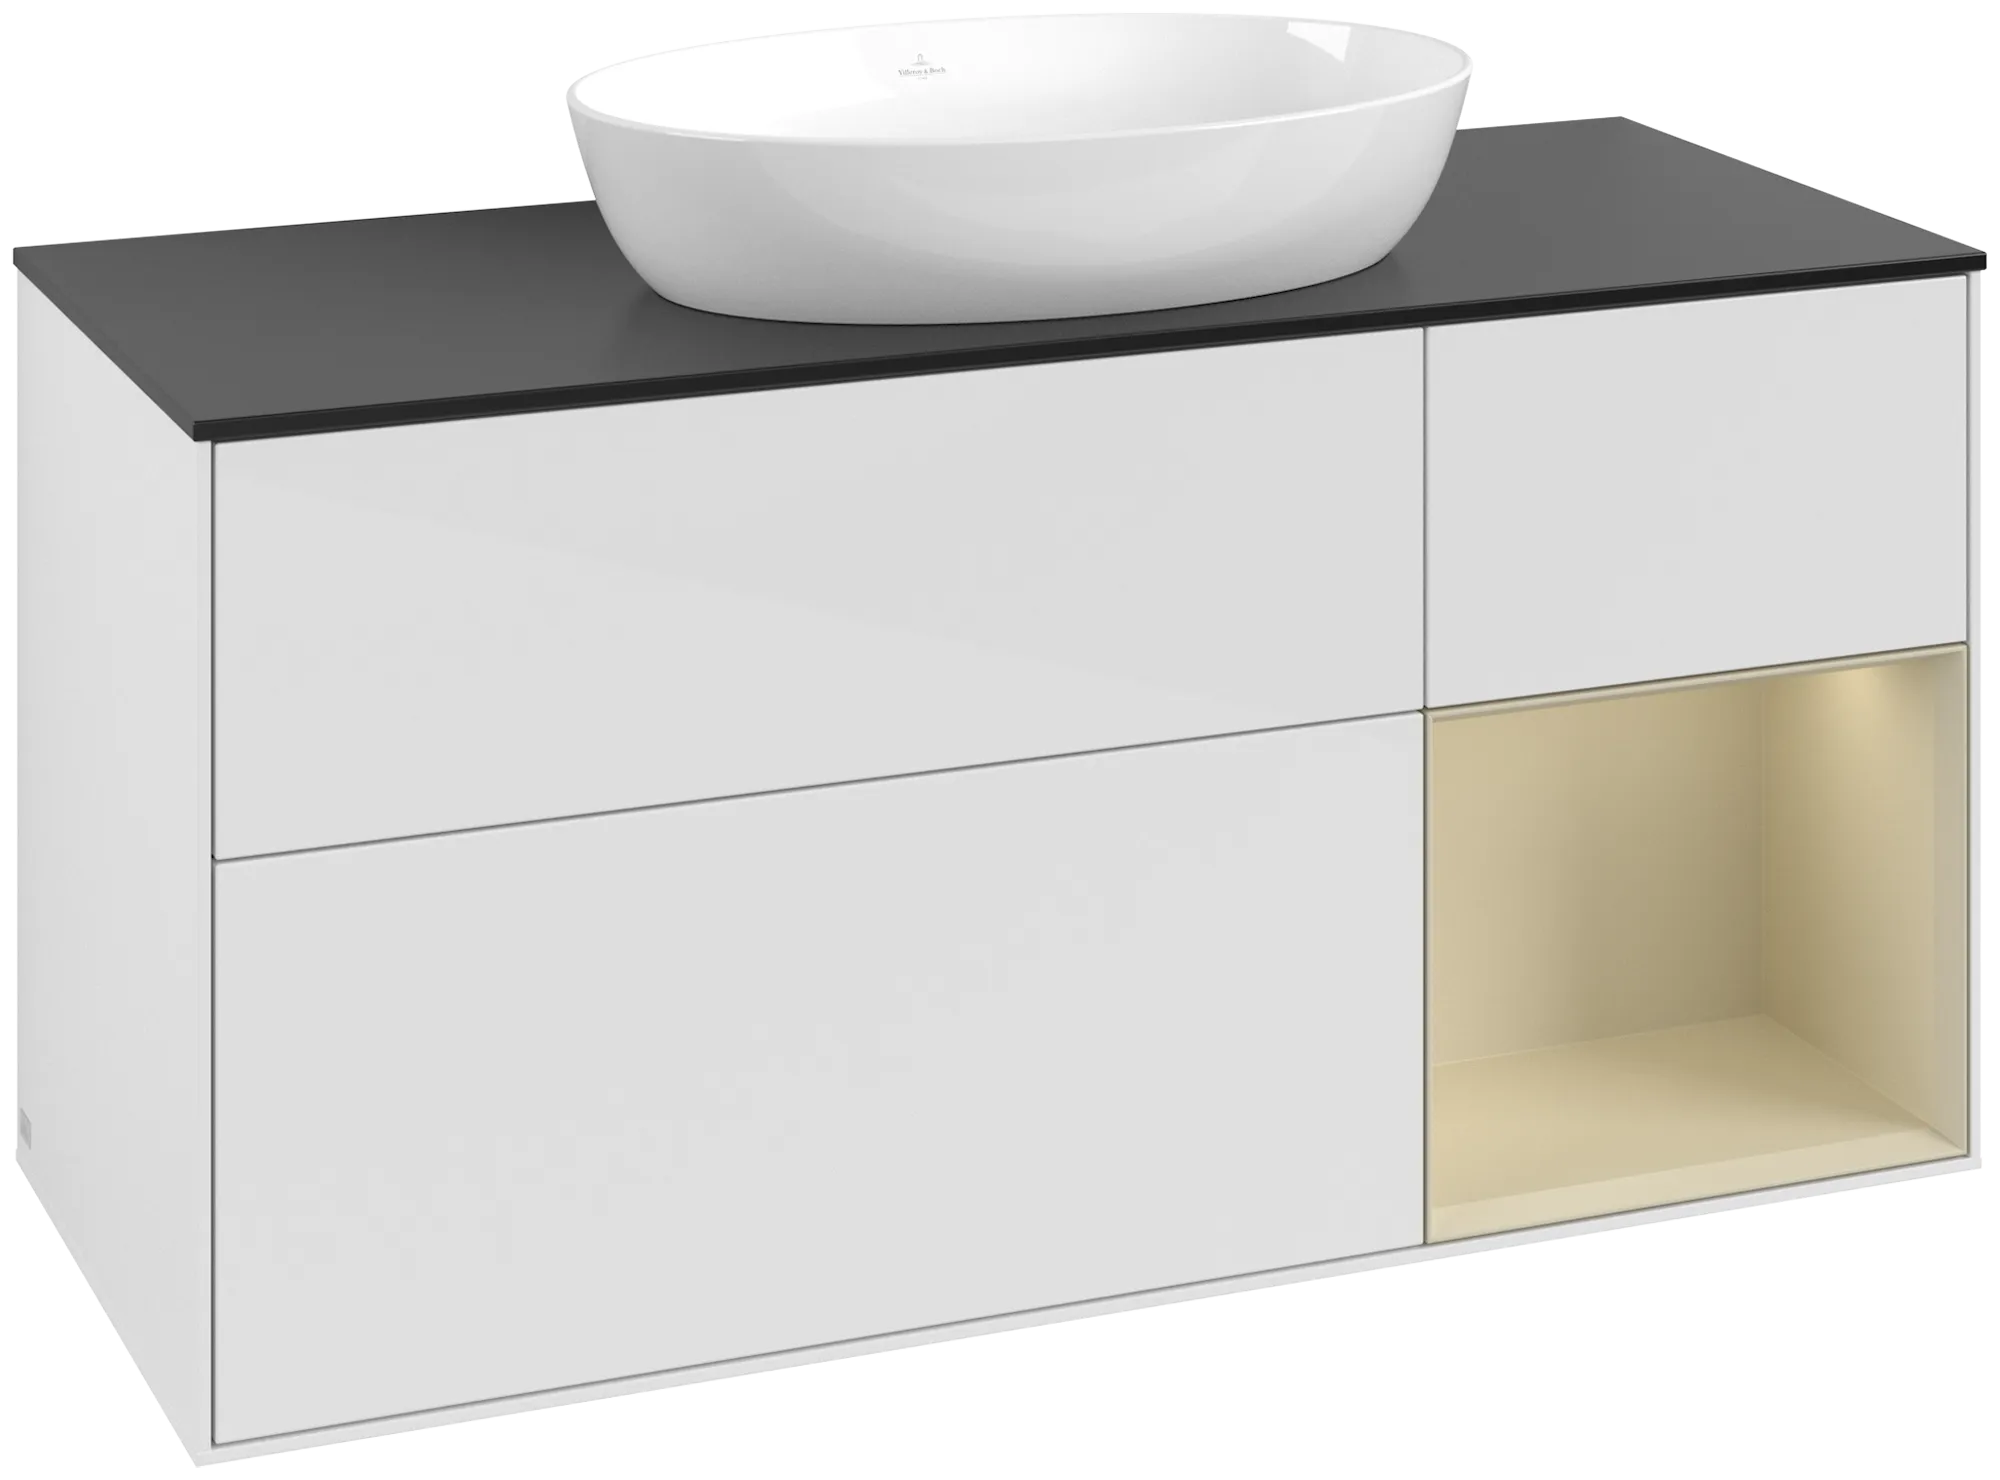 Obrázek VILLEROY BOCH Finion Vanity unit, with lighting, 3 pull-out compartments, 1200 x 603 x 501 mm, Glossy White Lacquer / Silk Grey Matt Lacquer / Glass Black Matt #GA72HJGF